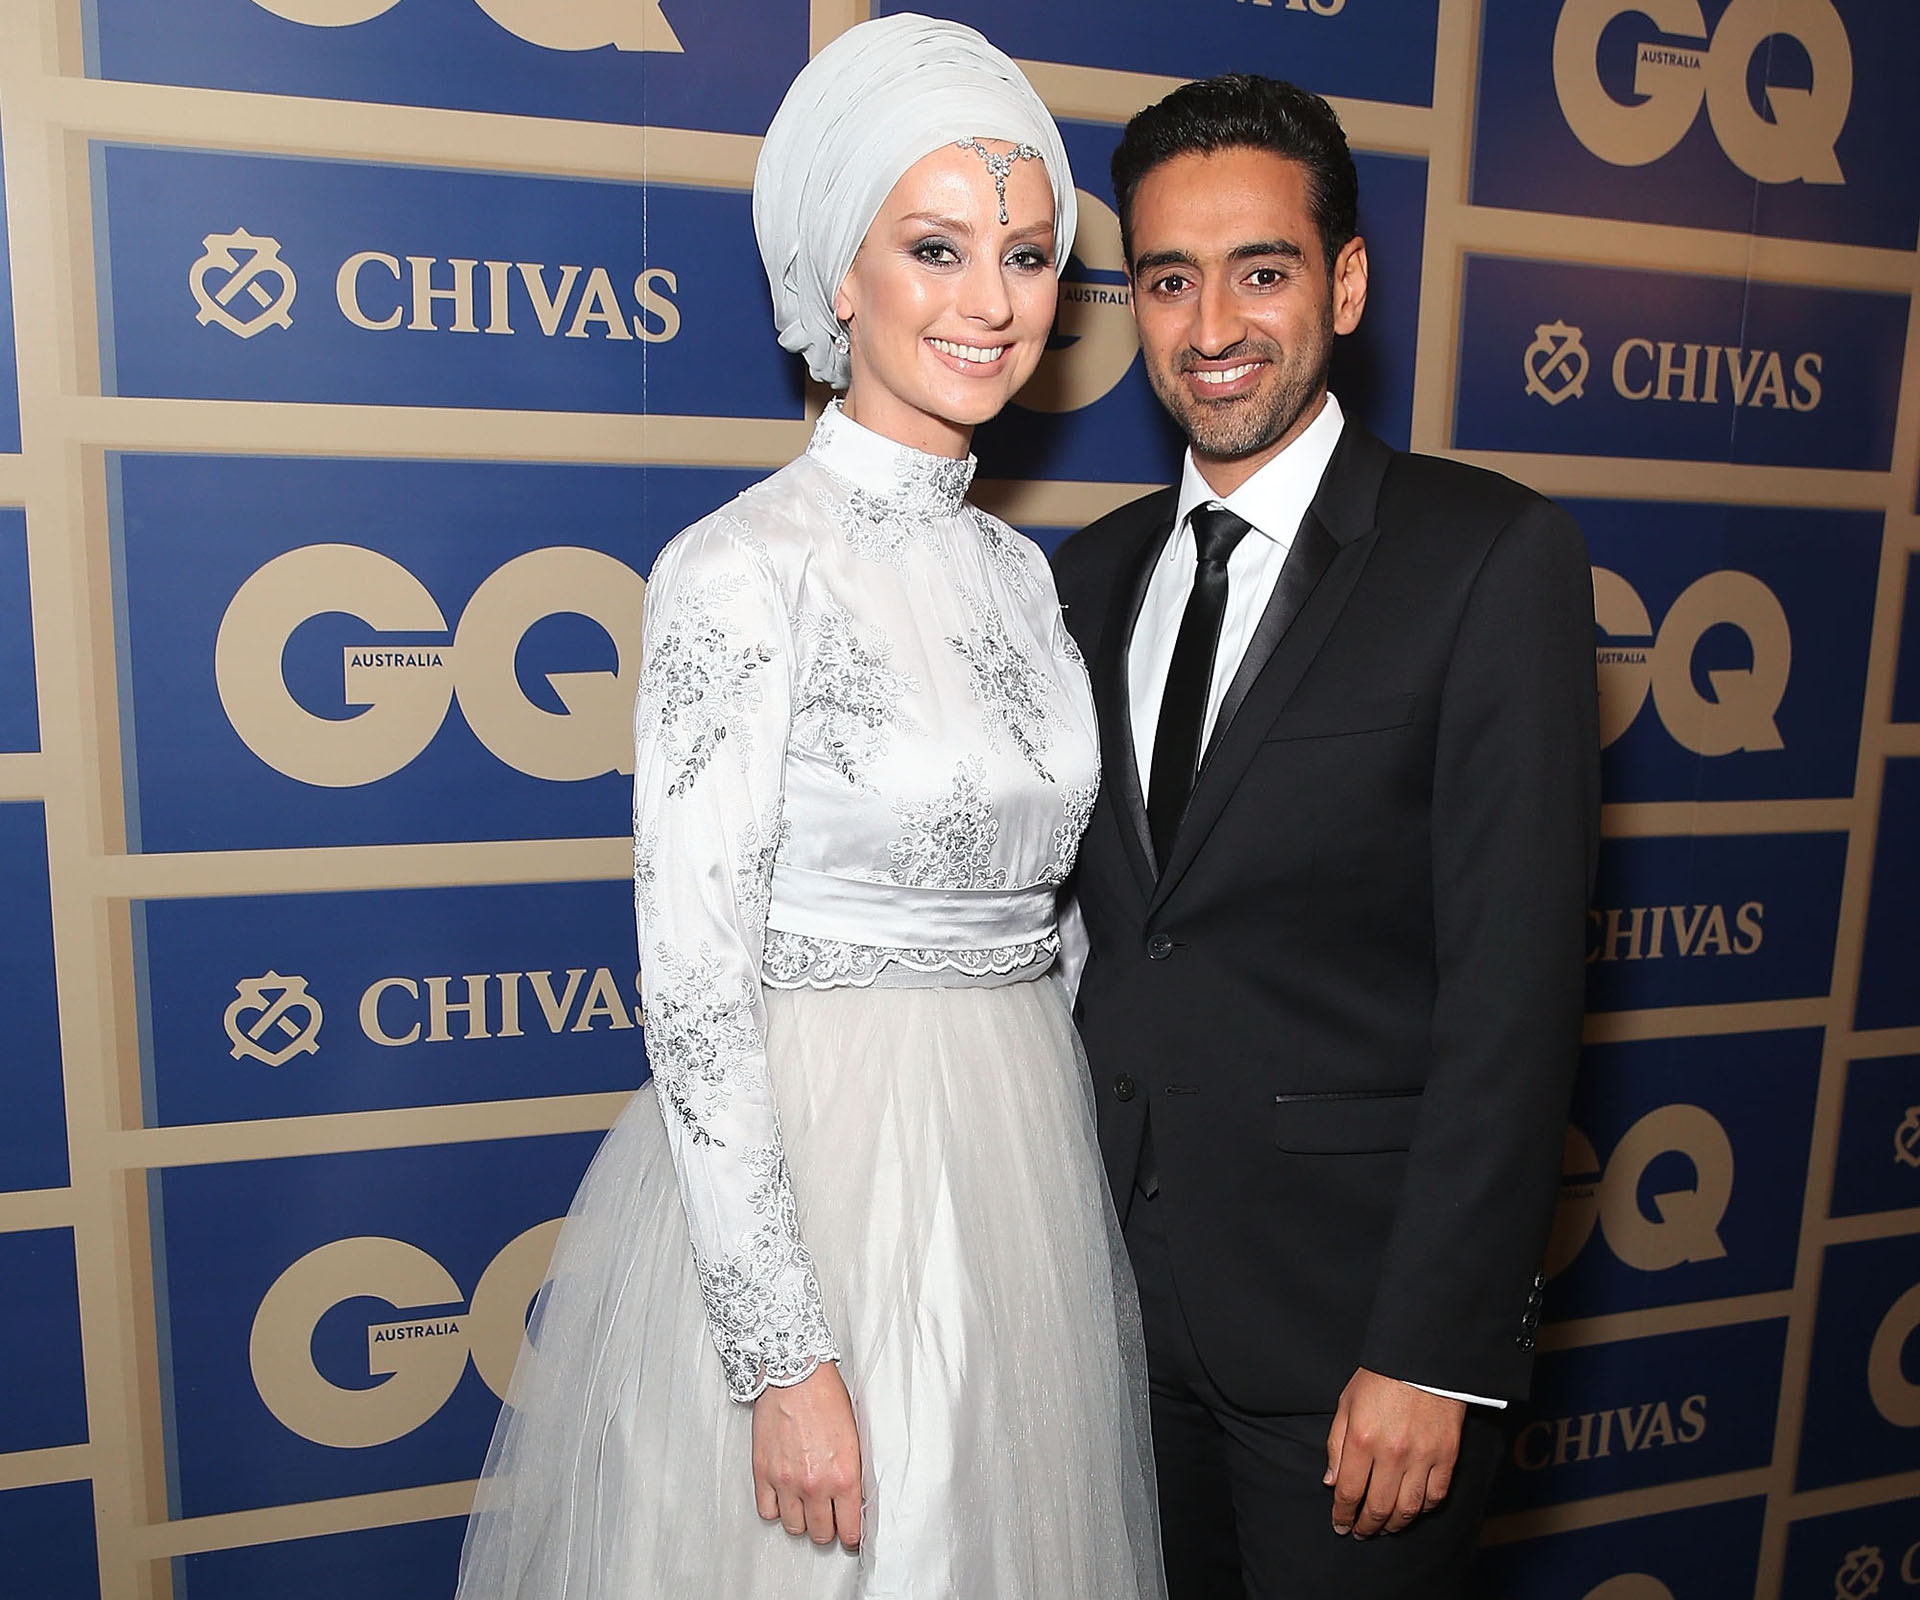 How Susan Carland is turning hate in to charity